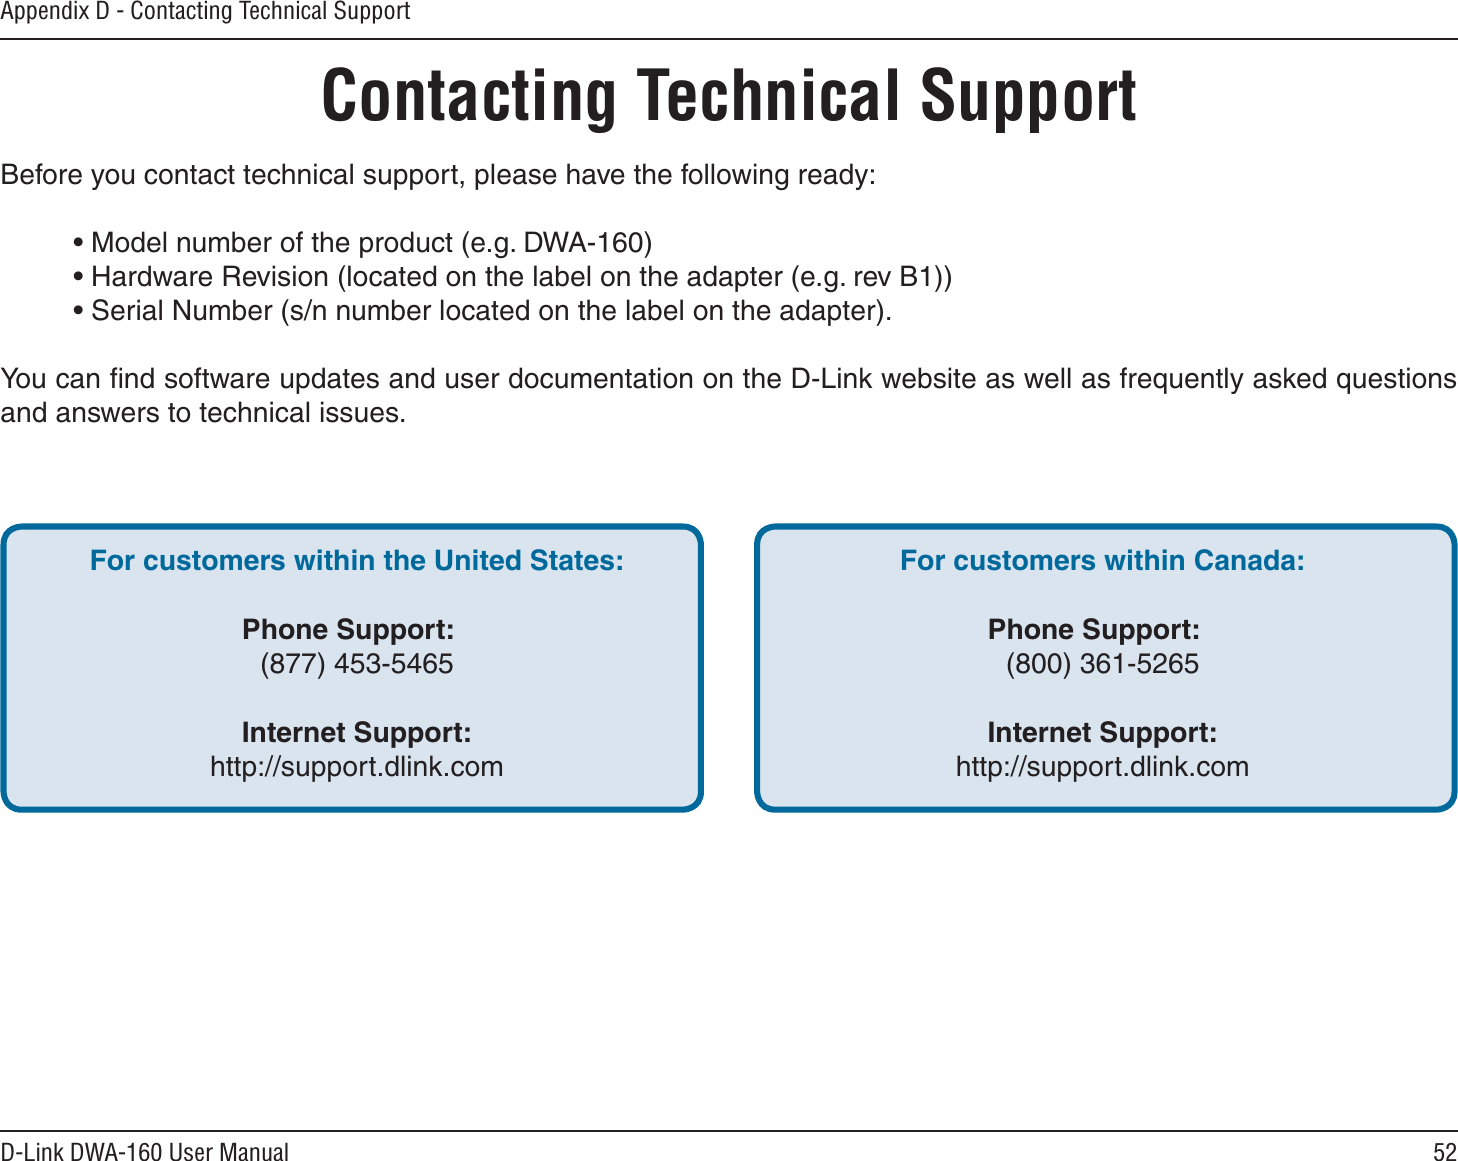 52D-Link DWA-160 User ManualAppendix D - Contacting Technical SupportContacting Technical SupportBefore you contact technical support, please have the following ready:• Model number of the product (e.g. DWA-160)• Hardware Revision (located on the label on the adapter (e.g. rev B1))• Serial Number (s/n number located on the label on the adapter). You can ﬁnd software updates and user documentation on the D-Link website as well as frequently asked questions and answers to technical issues.For customers within the United States:Phone Support:(877) 453-5465Internet Support:http://support.dlink.comFor customers within Canada:Phone Support:(800) 361-5265  Internet Support:http://support.dlink.com